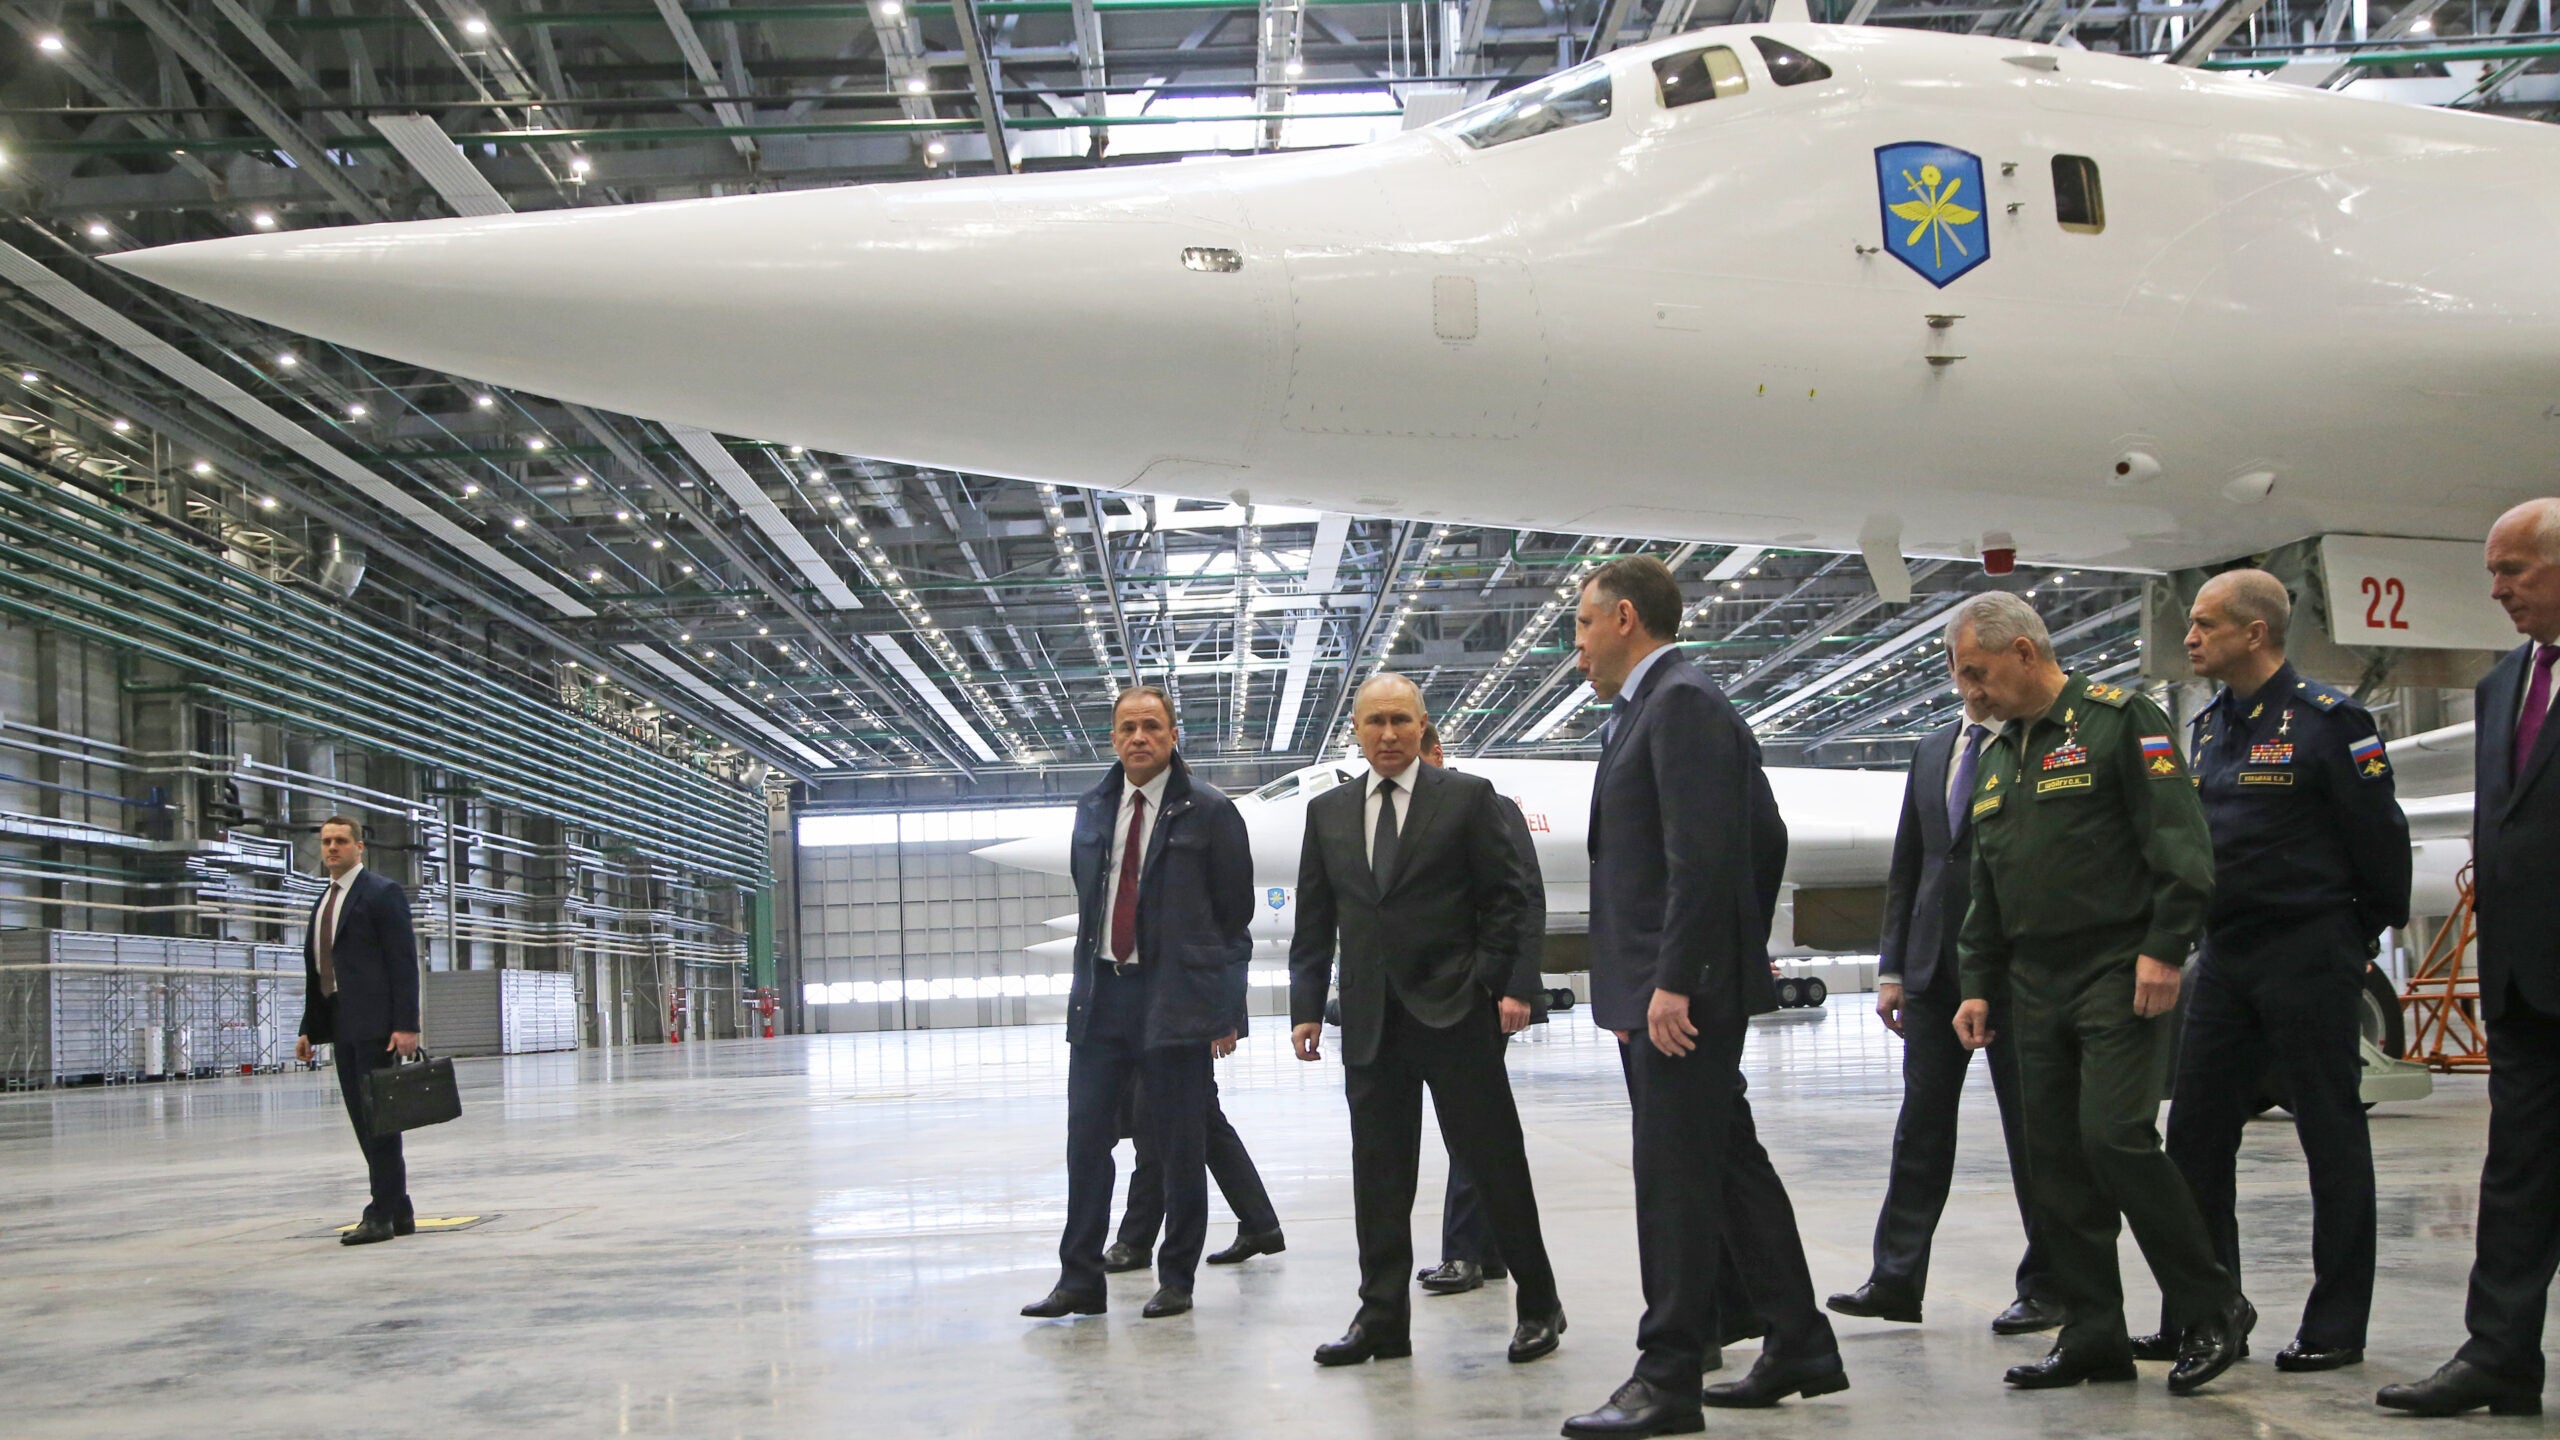 KAZAN, RUSSIA - FEBRUARY 21: (RUSSIA OUT) Russian President Vladimir Putin (C) observes a Tupolev TU-160 strategic jet bomber while visiting an aviation plant on February 21, 2024, in Kazan, Russia. Putin is embarking on a two-day trip to Kazan ahead of the 2024 Presidential Elections, scheduled for March. (Photo by Contributor/Getty Images)